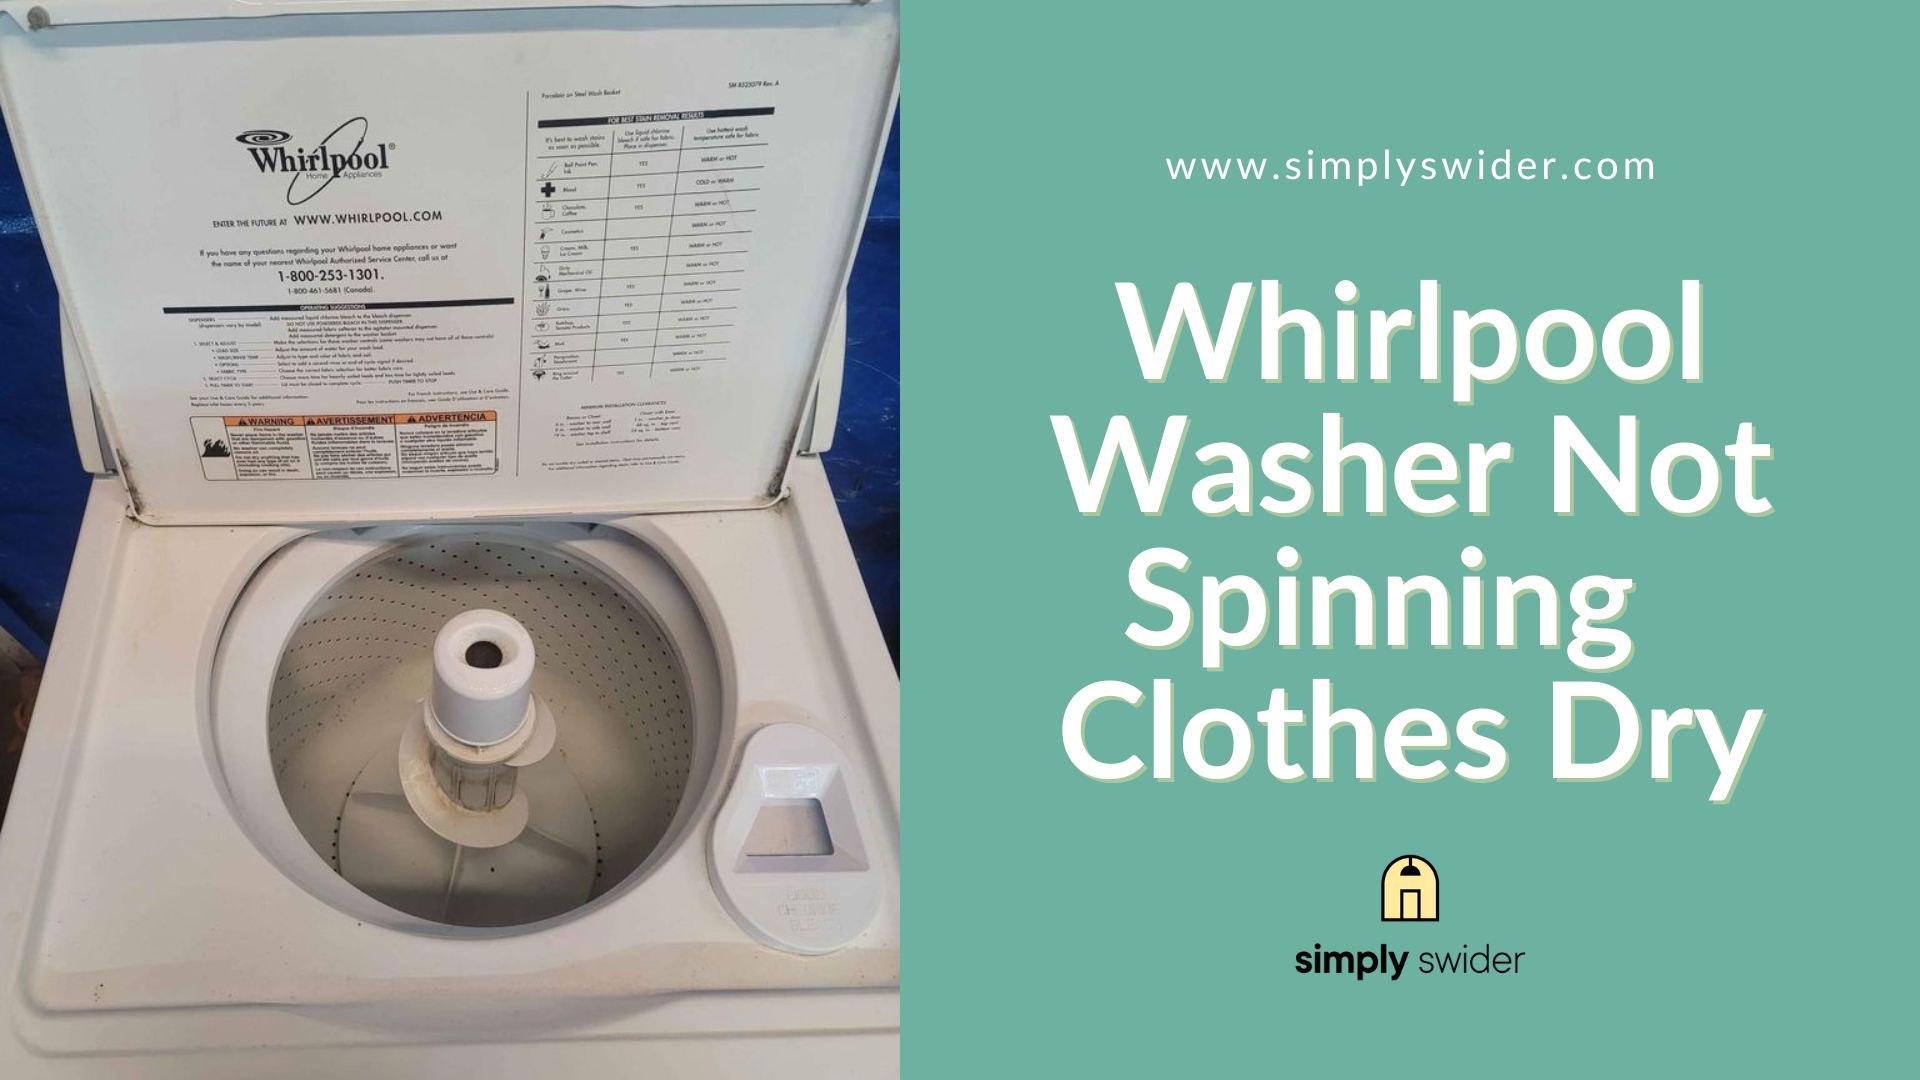 Whirlpool Washer Not Spinning Clothes Dry